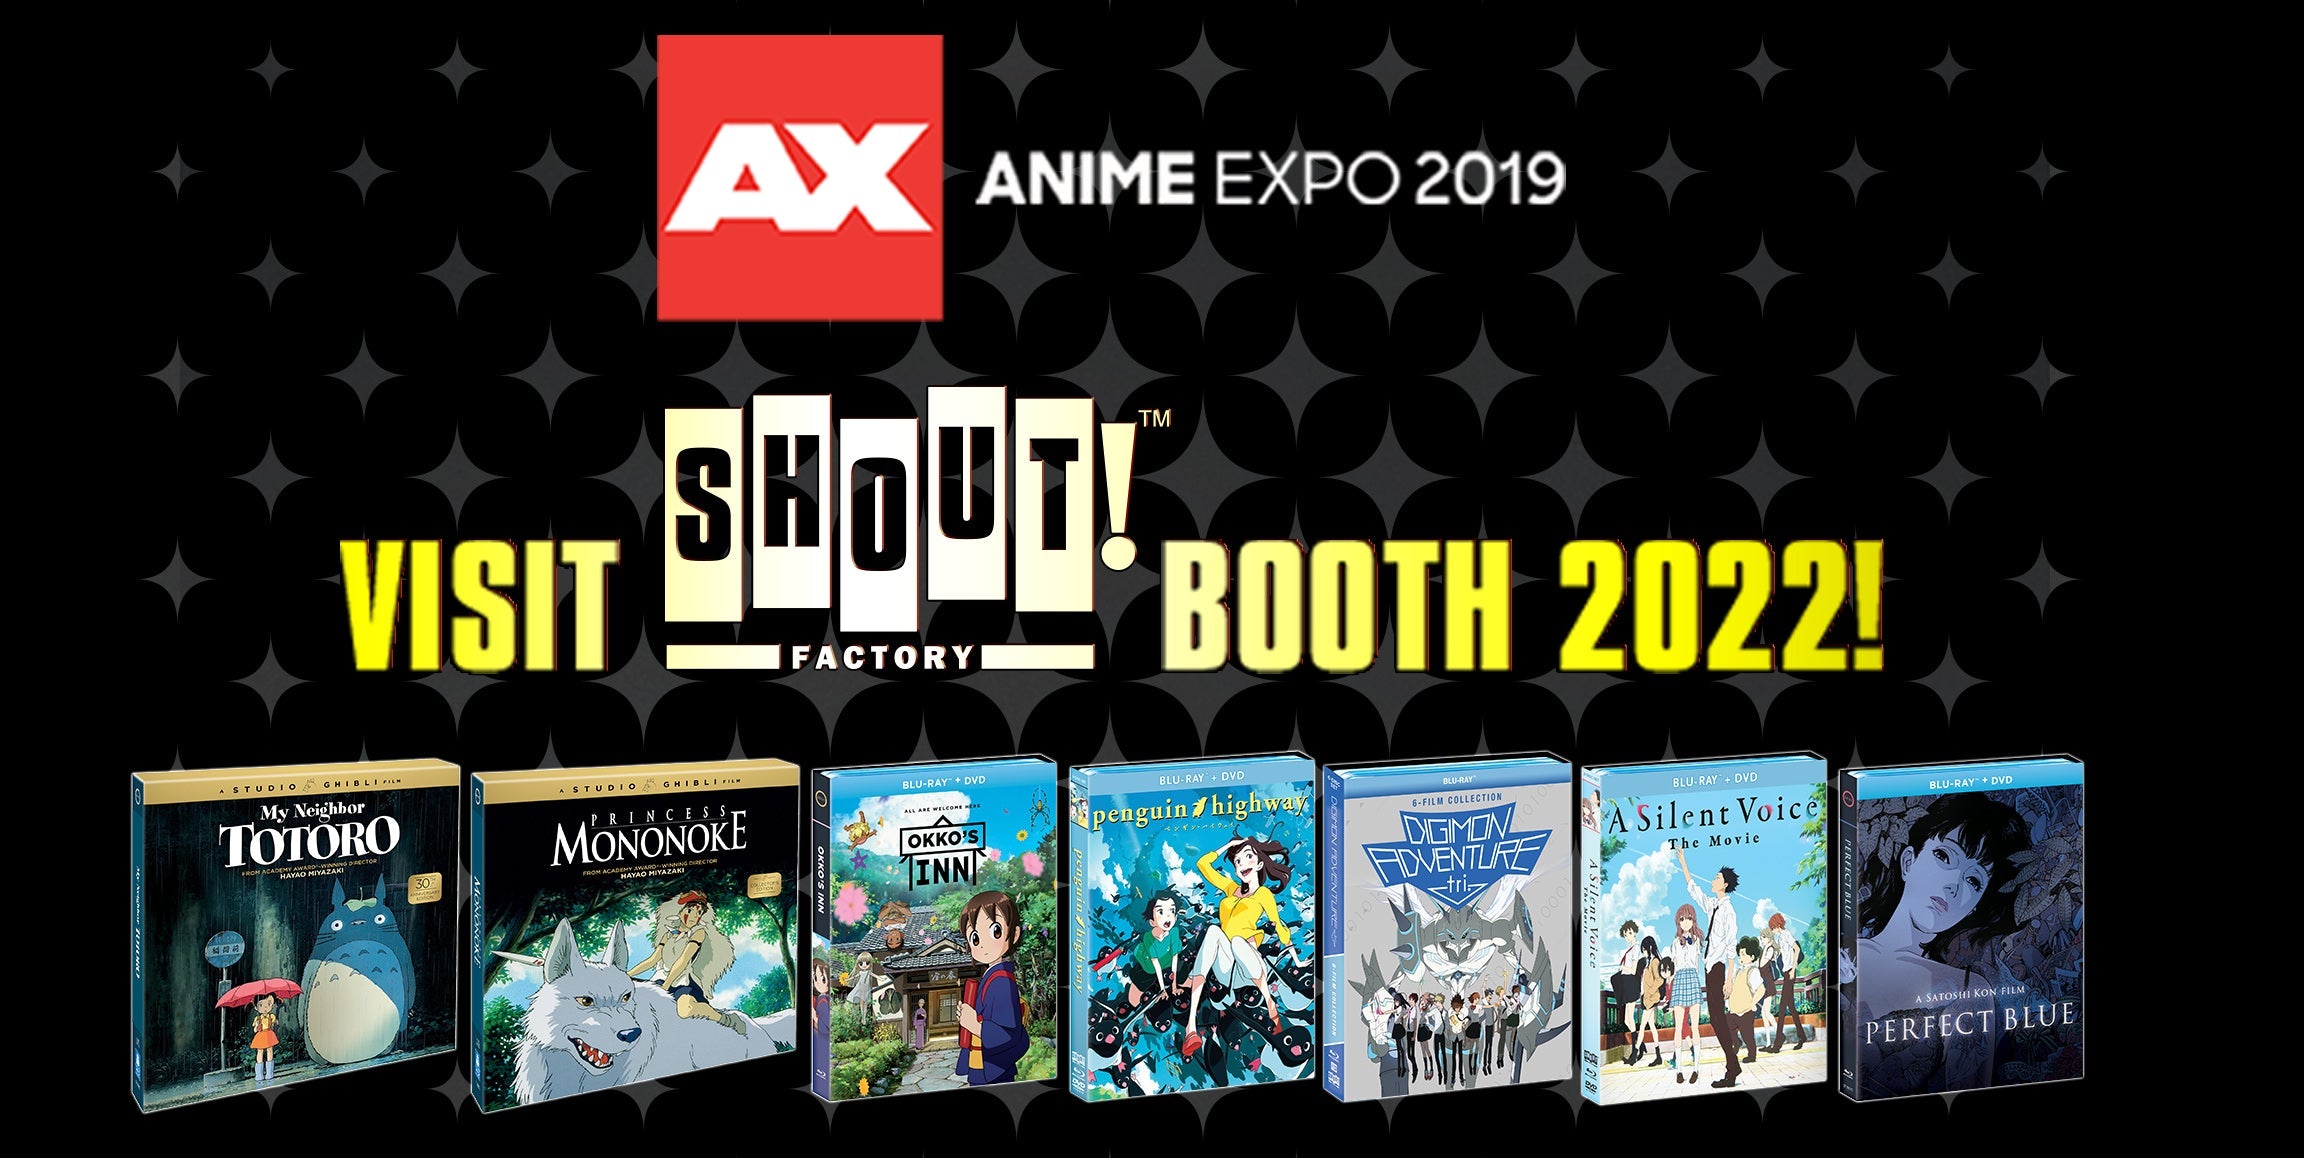 Shout! Factory Unveils Its Anime Expo 2019 Lineup, Featuring World Renowned Anime Brands, Popular Home Entertainment Products And Interactive Fan Activities